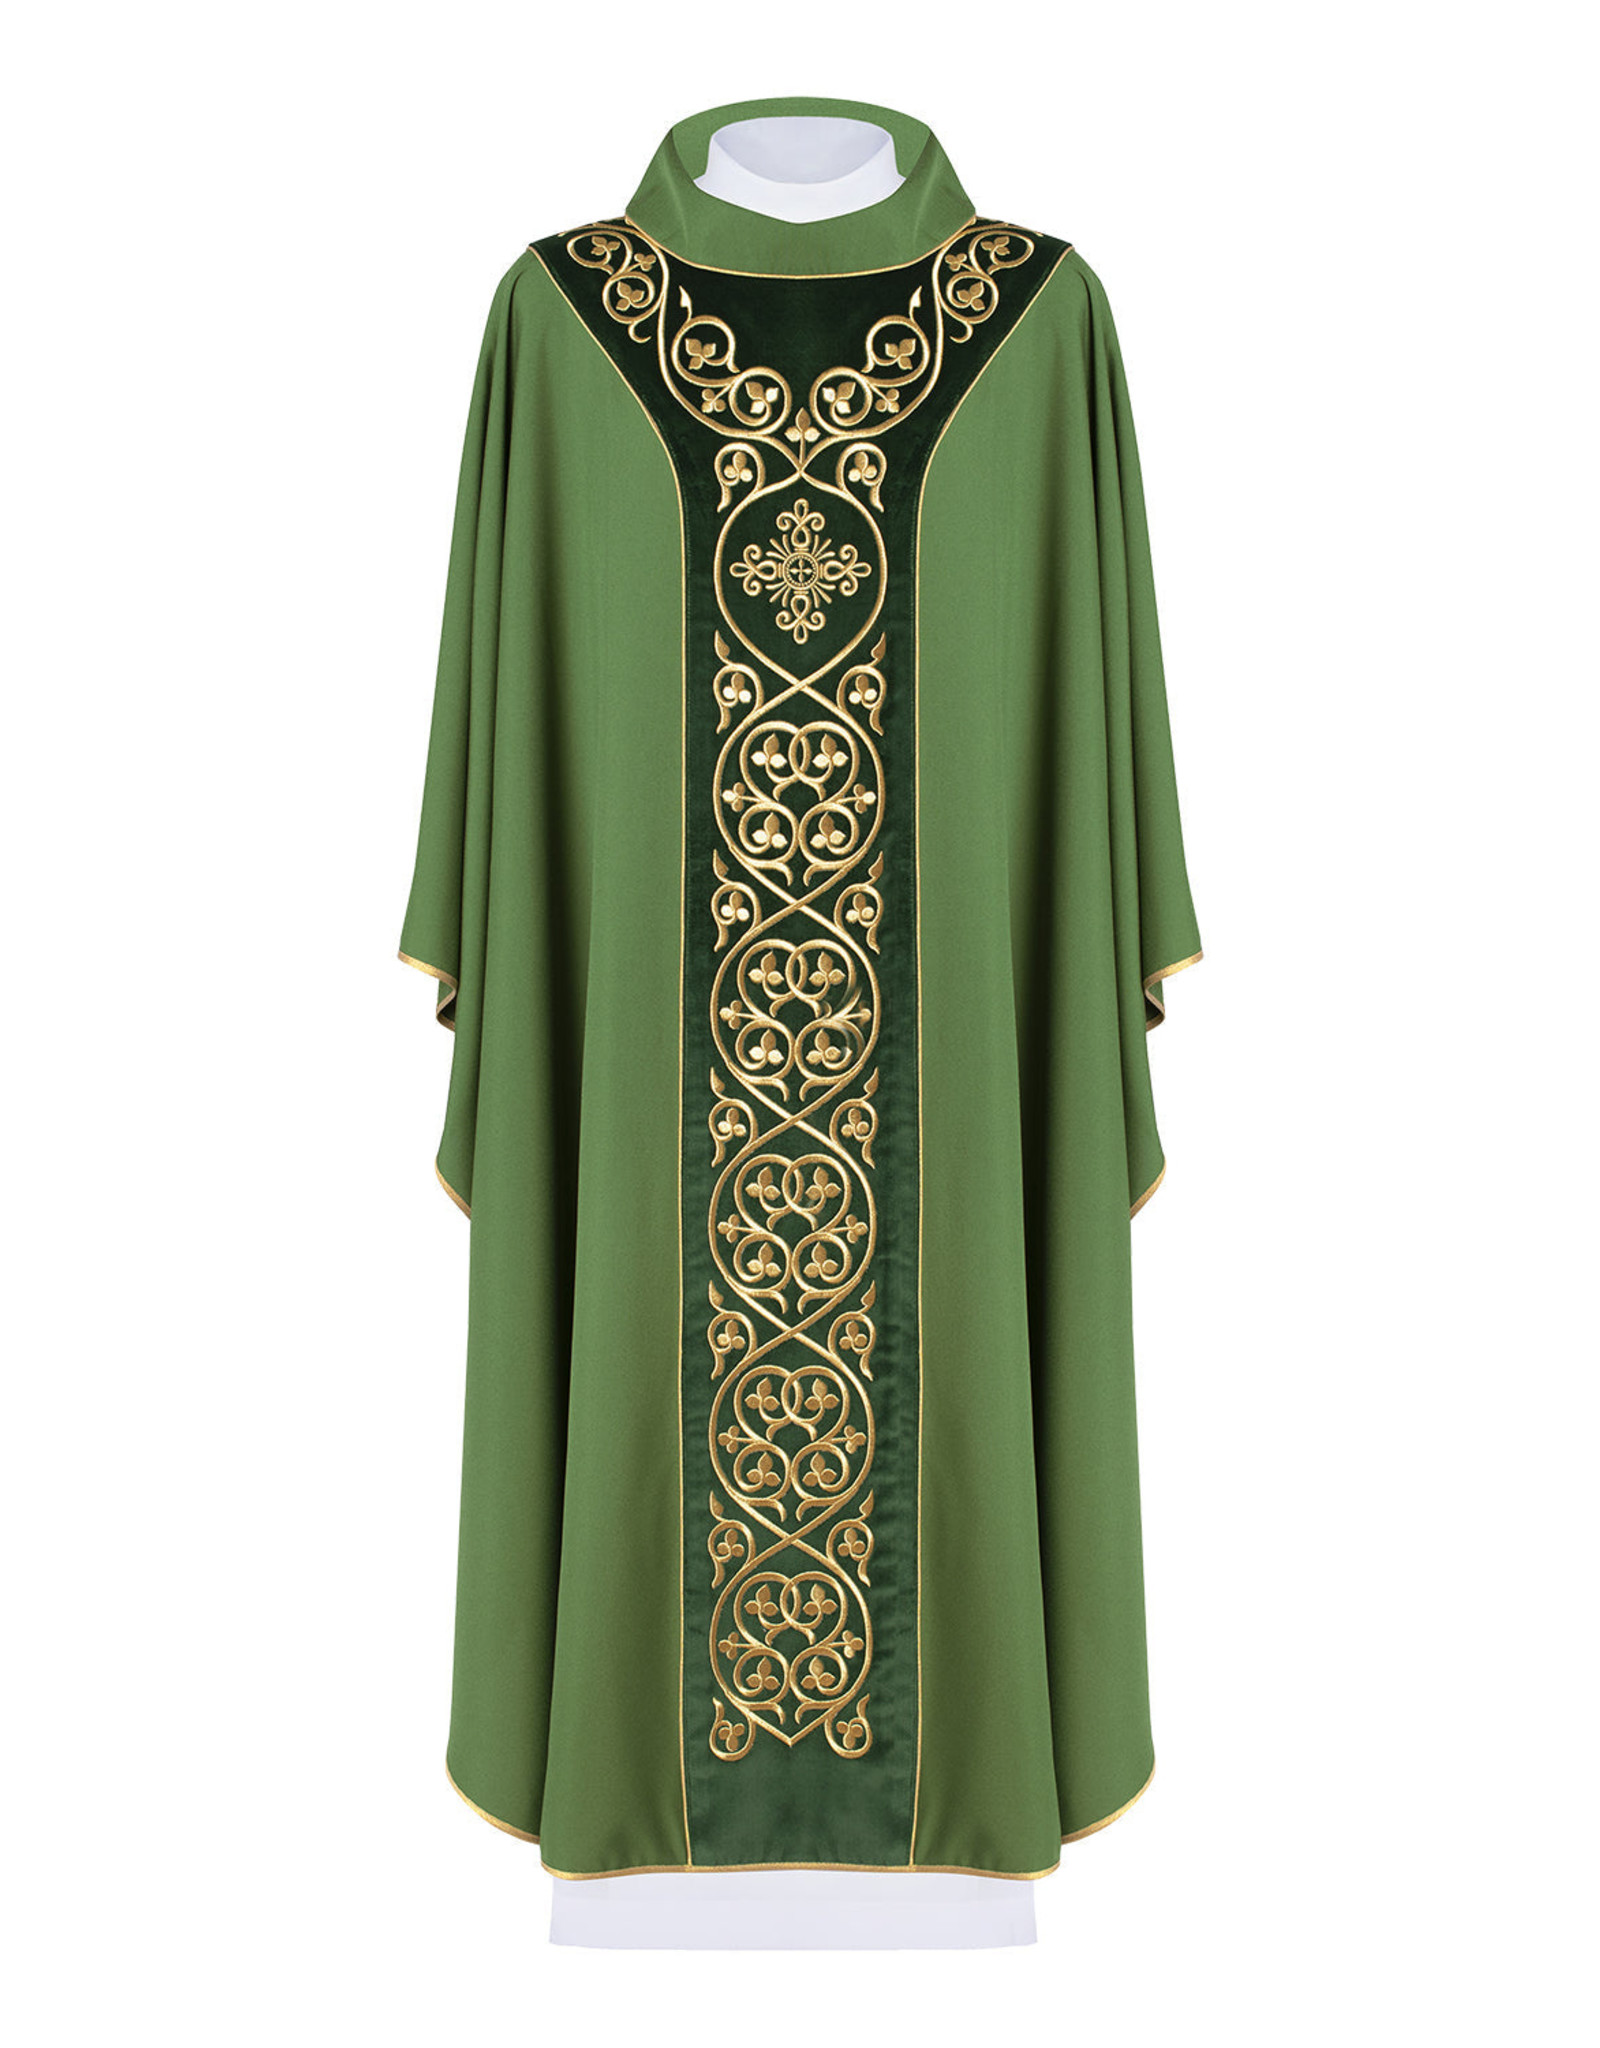 Haftina Chasuble - Intricate Cross Design with Velvet Embroidery